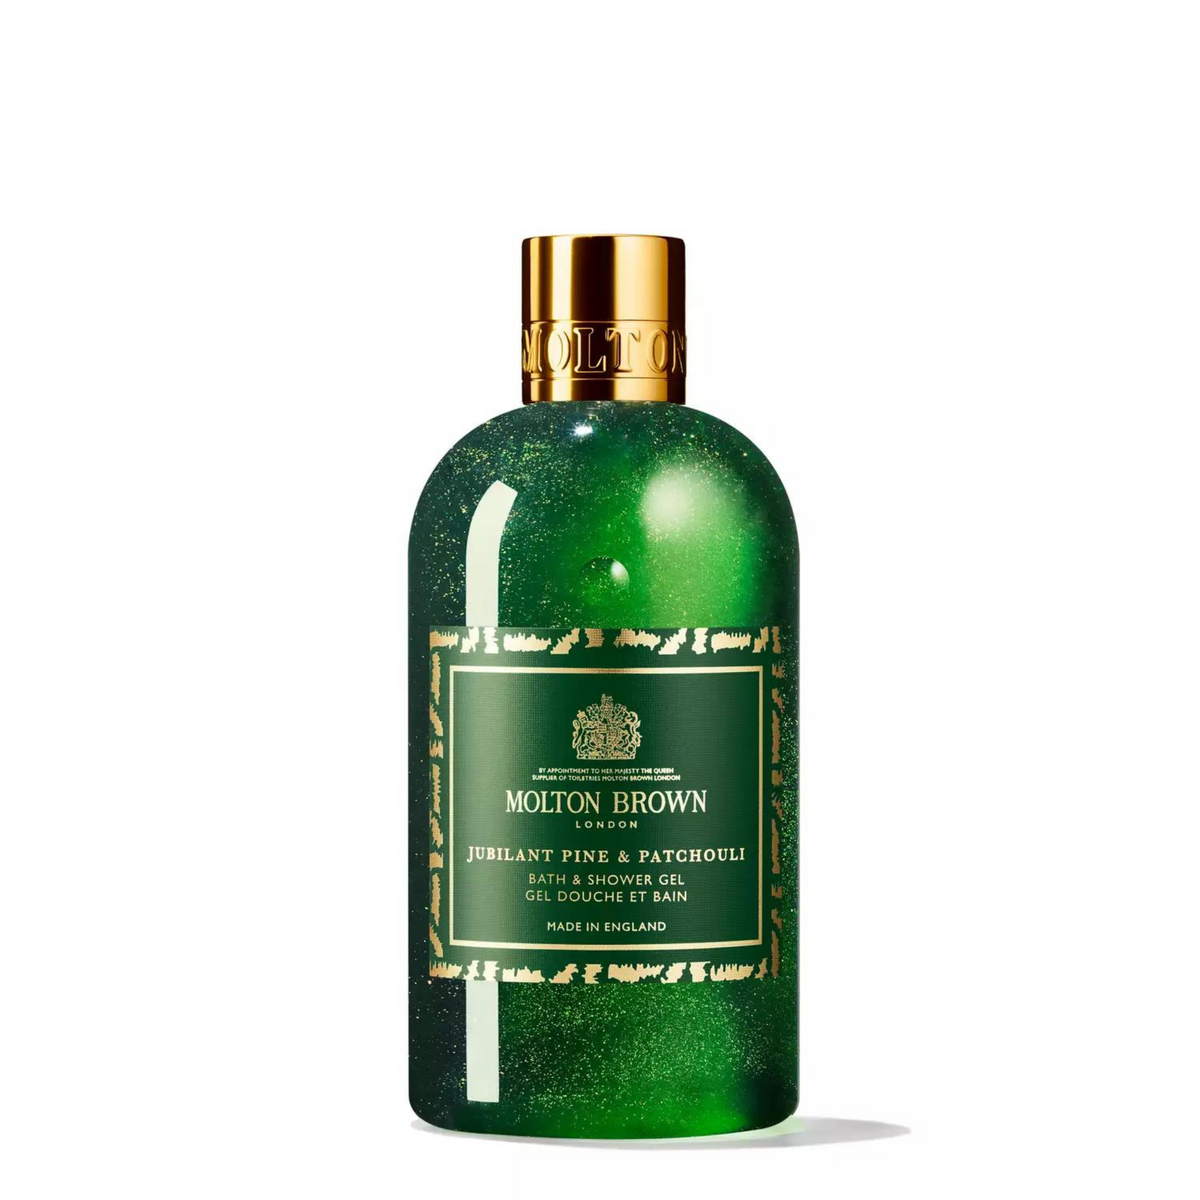 Primary Image of Holiday Jubilant Pine and Patchouli Shower Gel